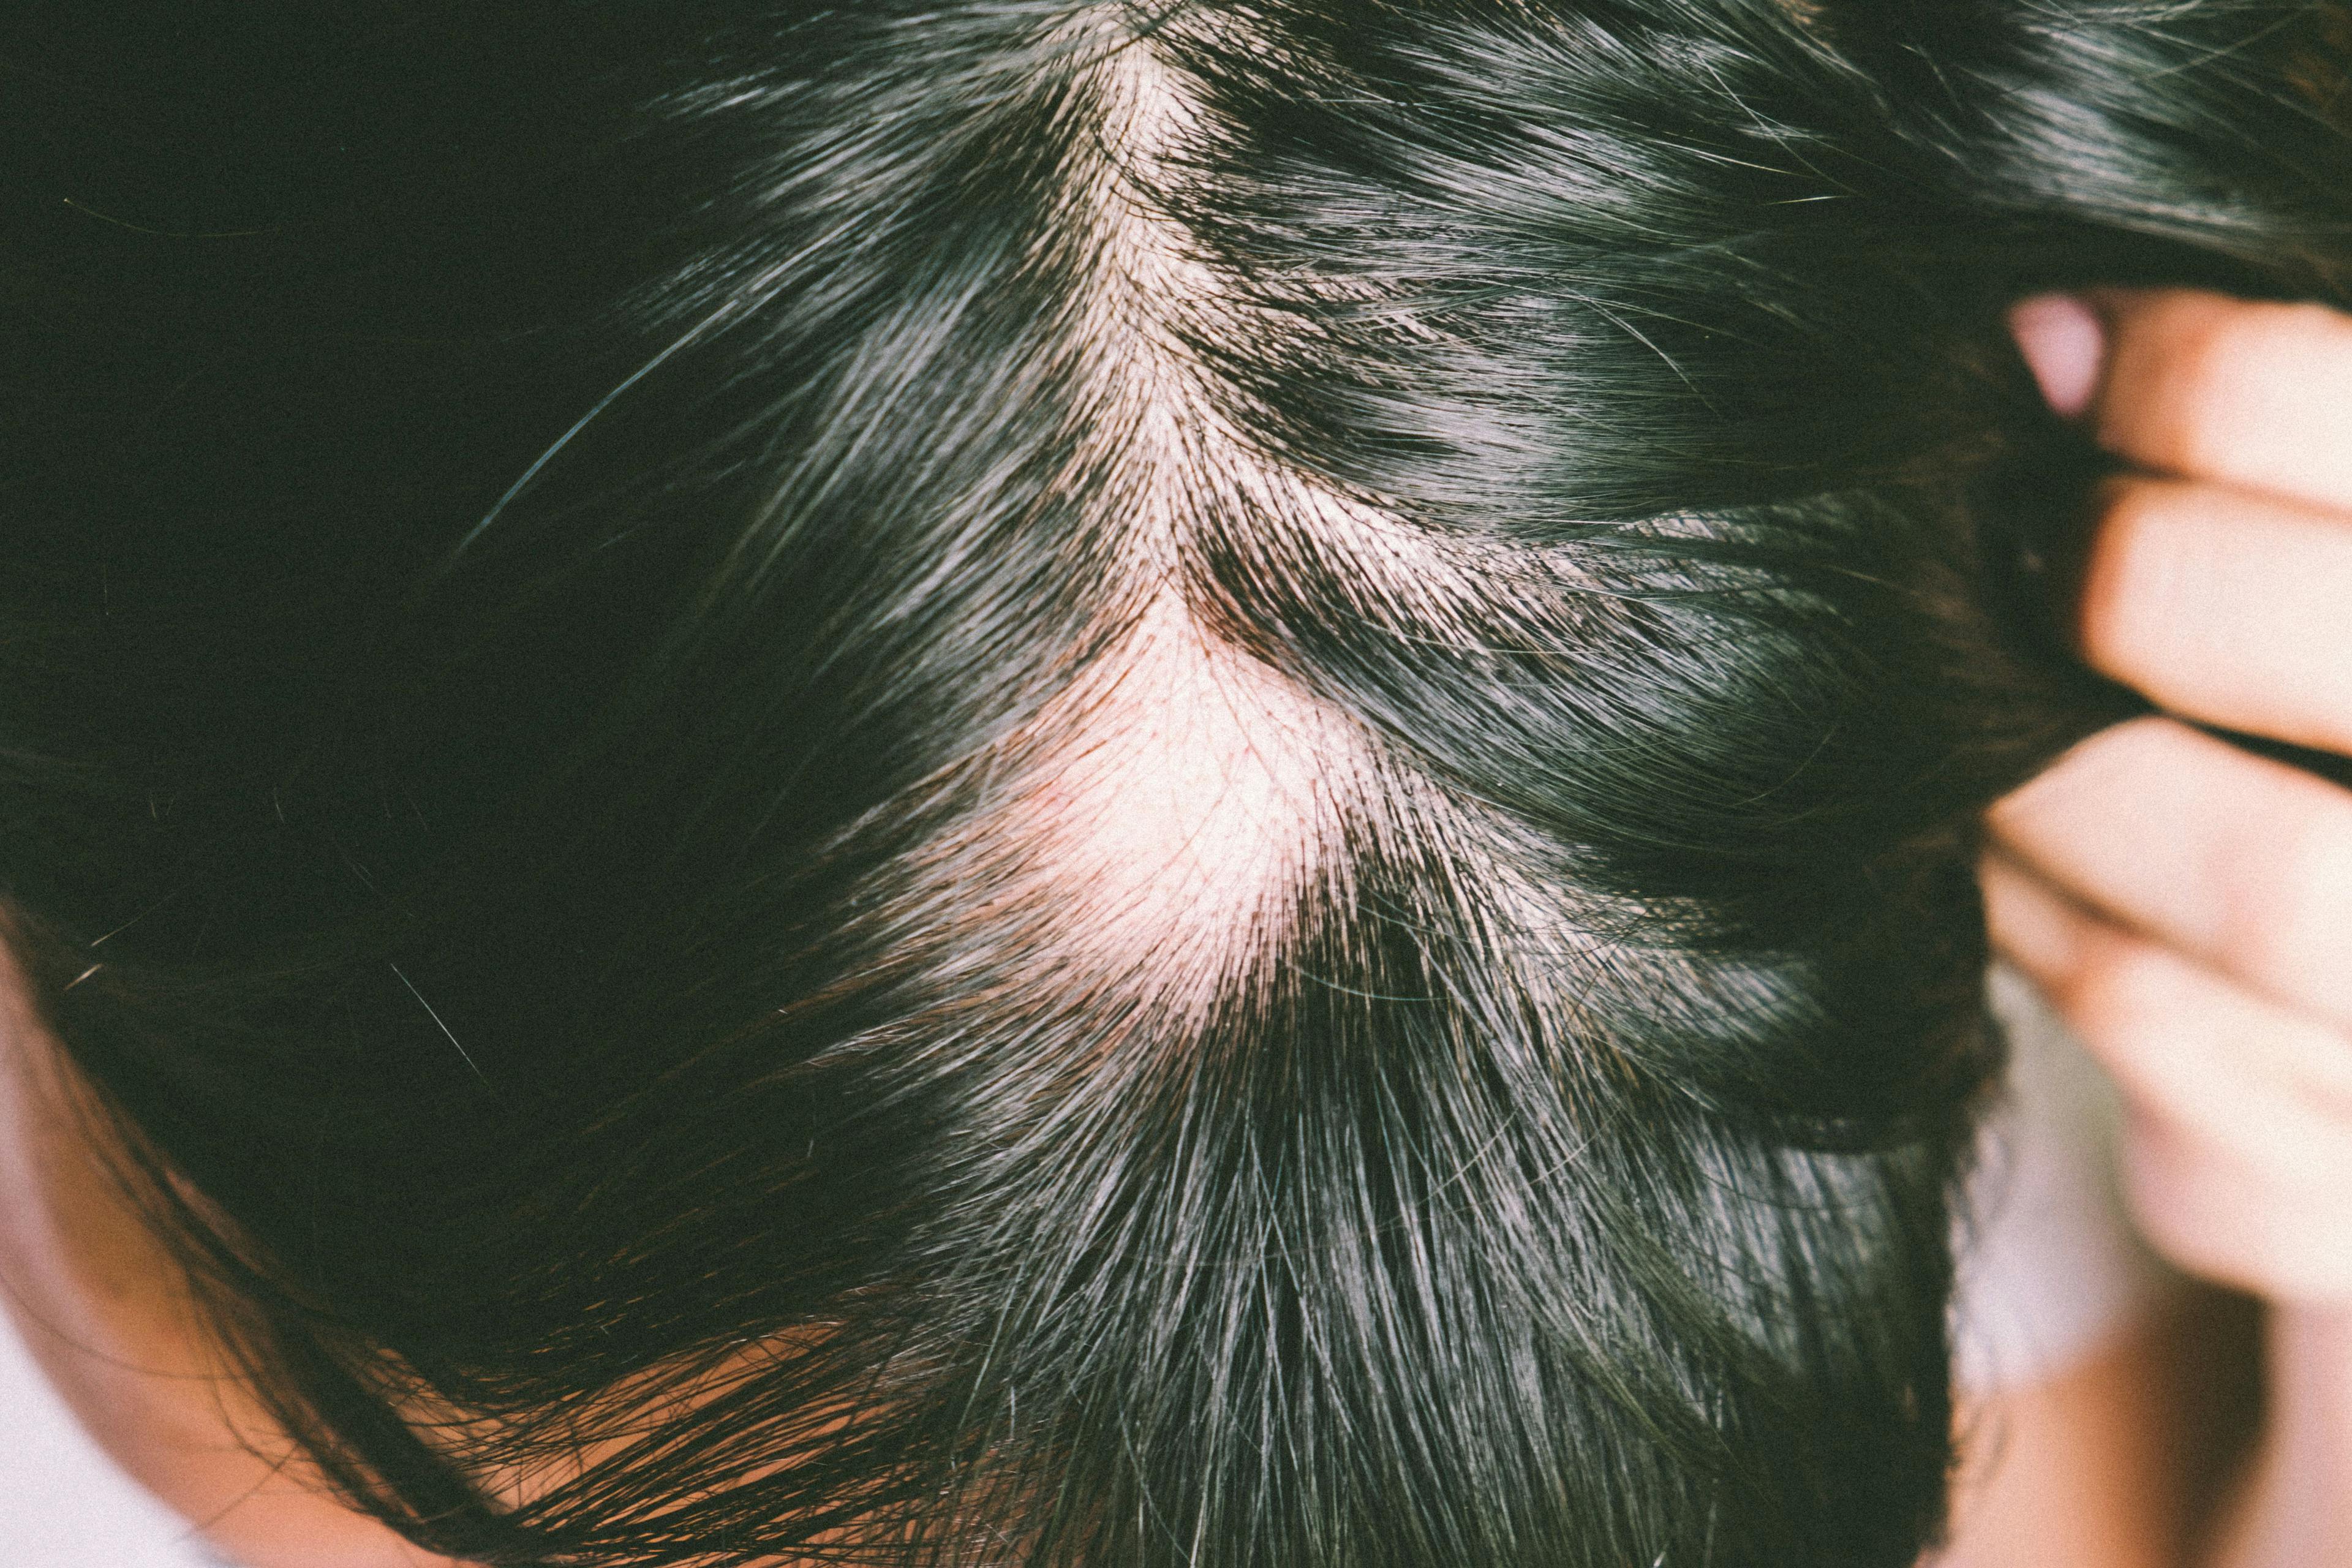 POLL: When Does Alopecia Areata Typically Develop? 